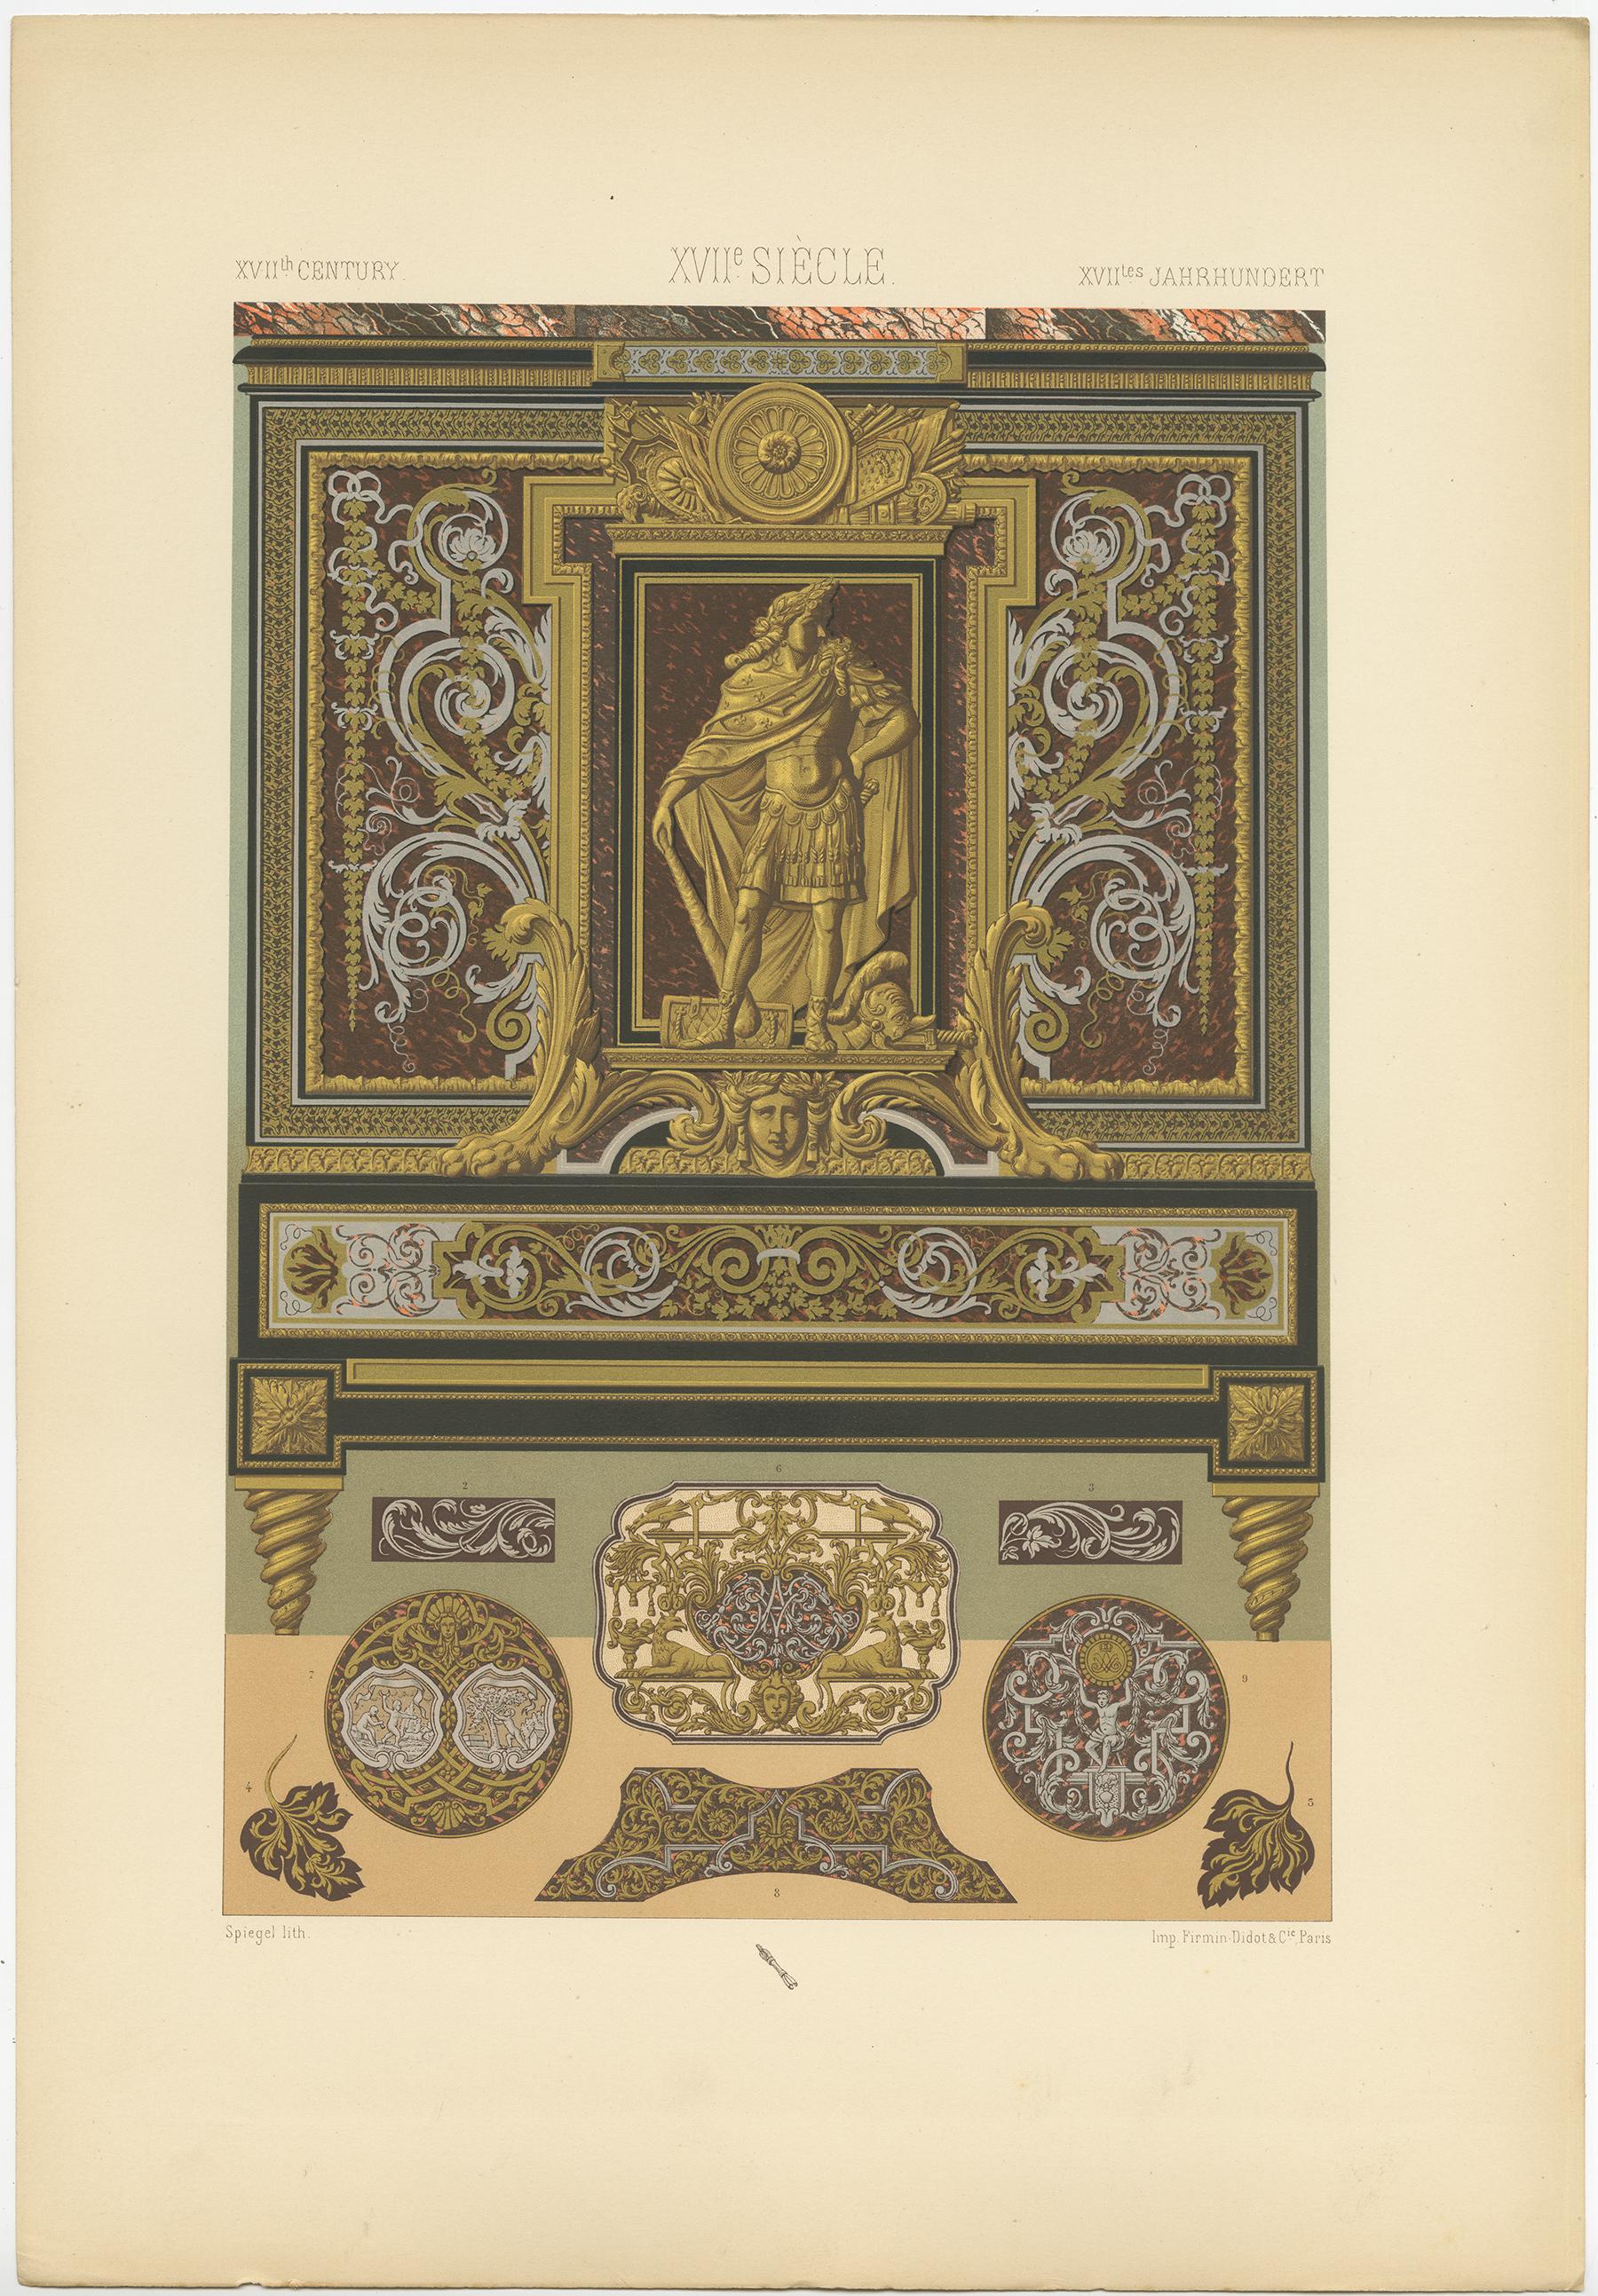 Antique print titled '17th Century - XVIIc Siècle - XVIILes Jahrhundert'. Chromolithograph of metallic inlay from furniture, France ornaments. This print originates from 'l'Ornement Polychrome' by Auguste Racinet. Published, circa 1890.